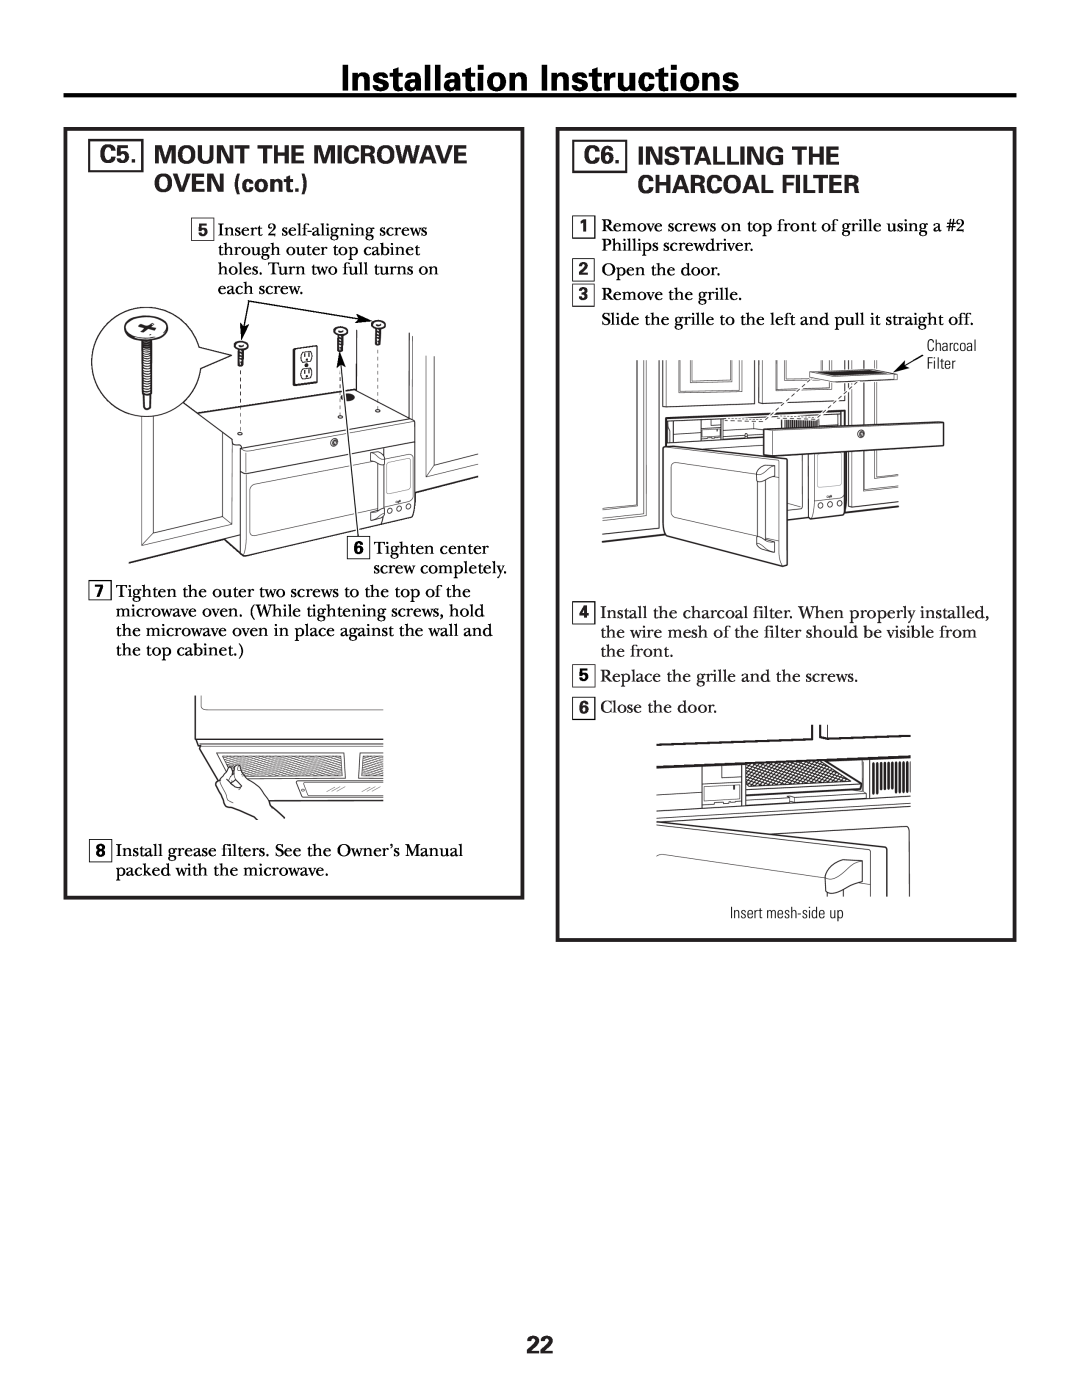 GE CVM2072 warranty C5. MOUNT THE MICROWAVE OVEN cont, C6. INSTALLING THE CHARCOAL FILTER, Installation Instructions 